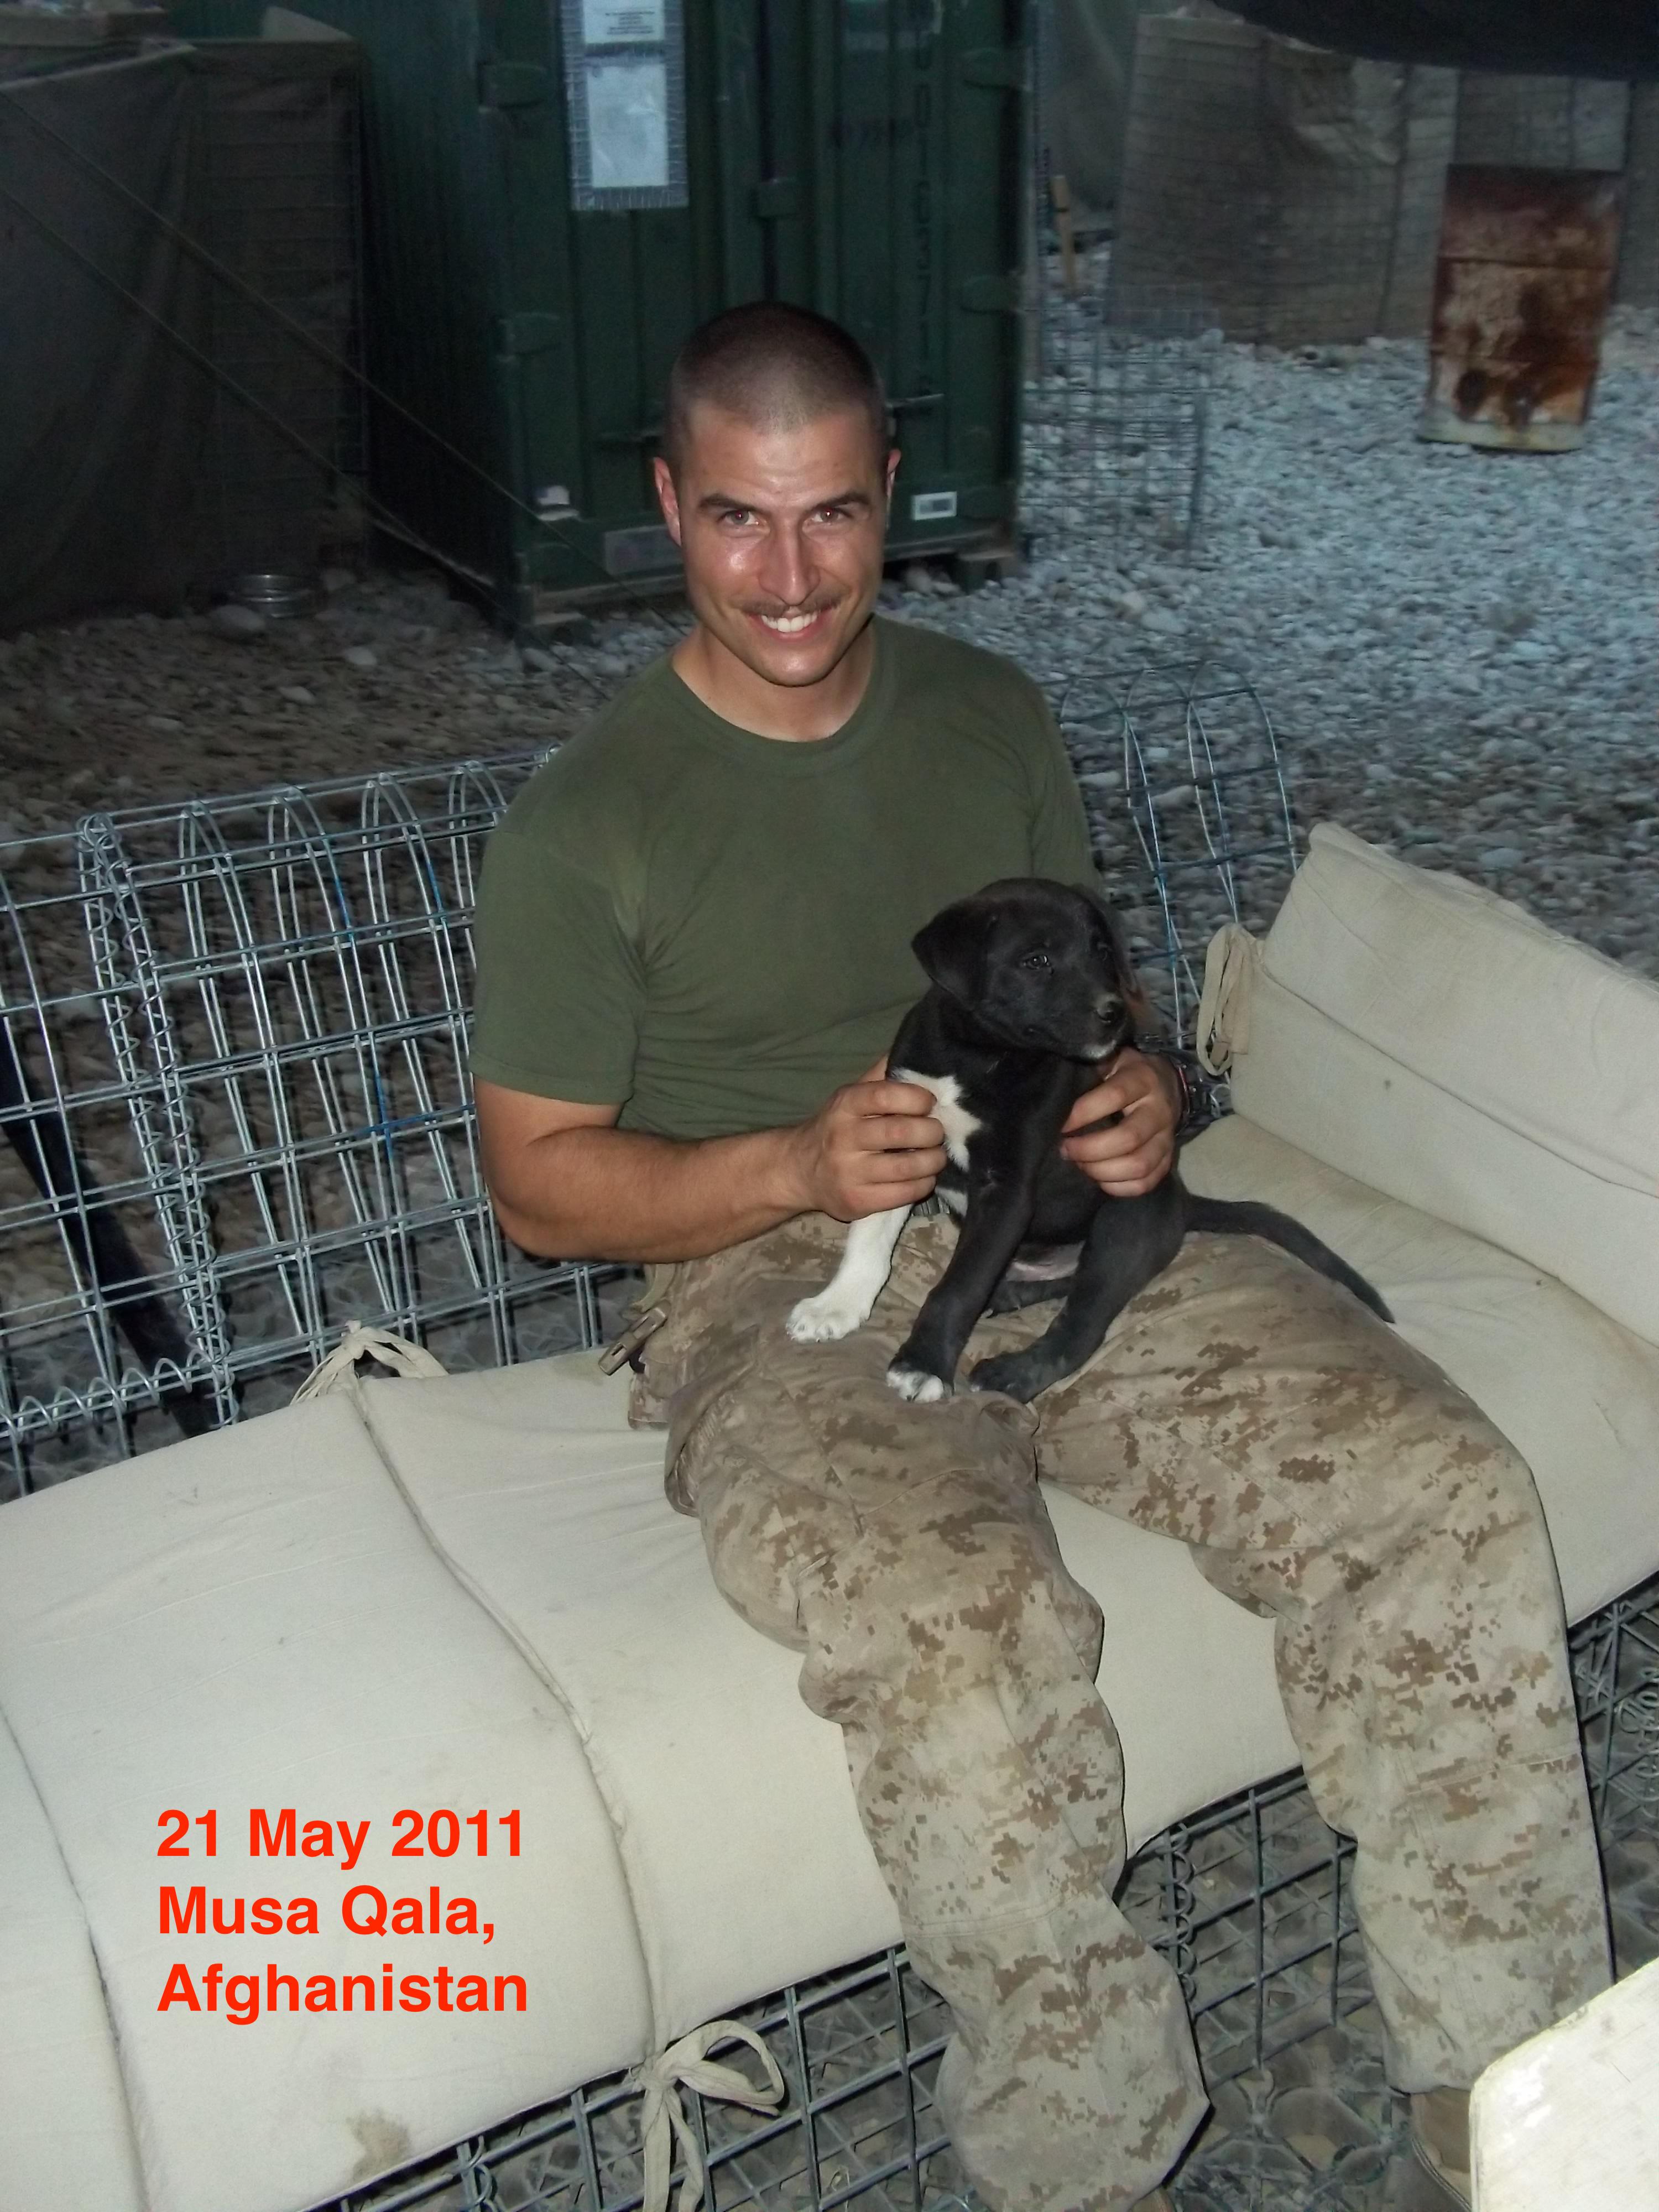 Me in Afghanistan with puppy